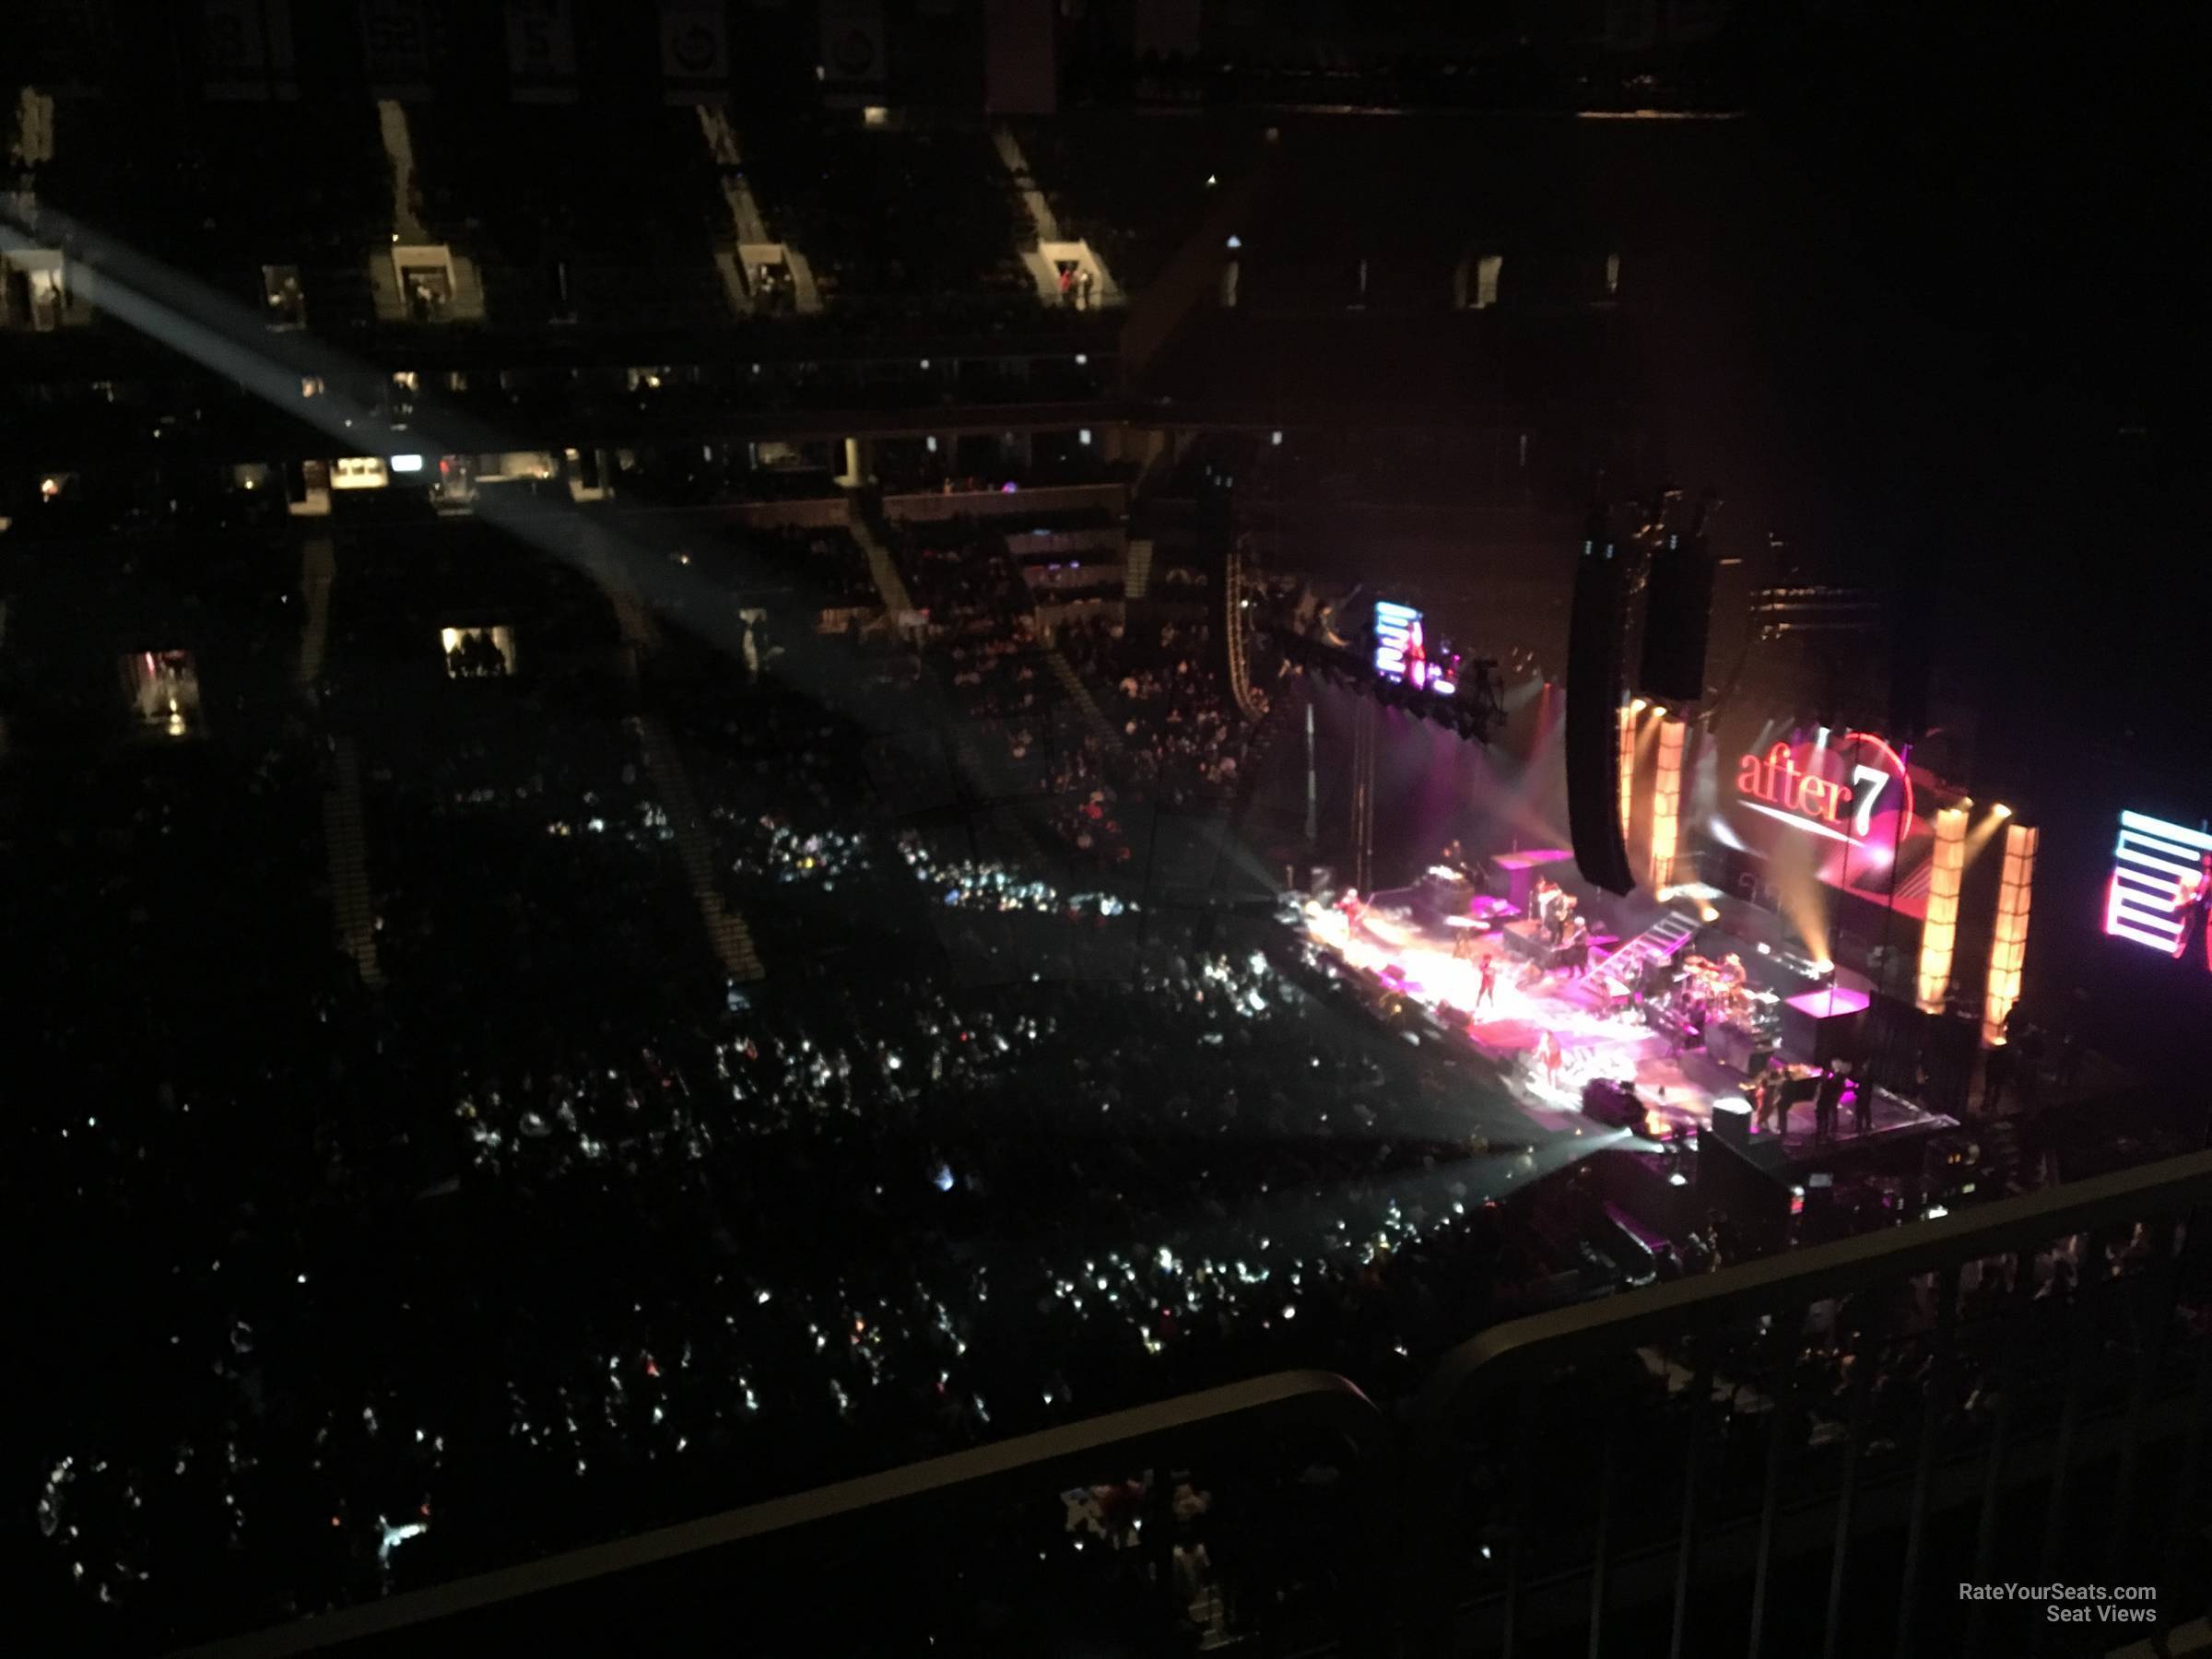 section 209, row 4 seat view  for concert - barclays center